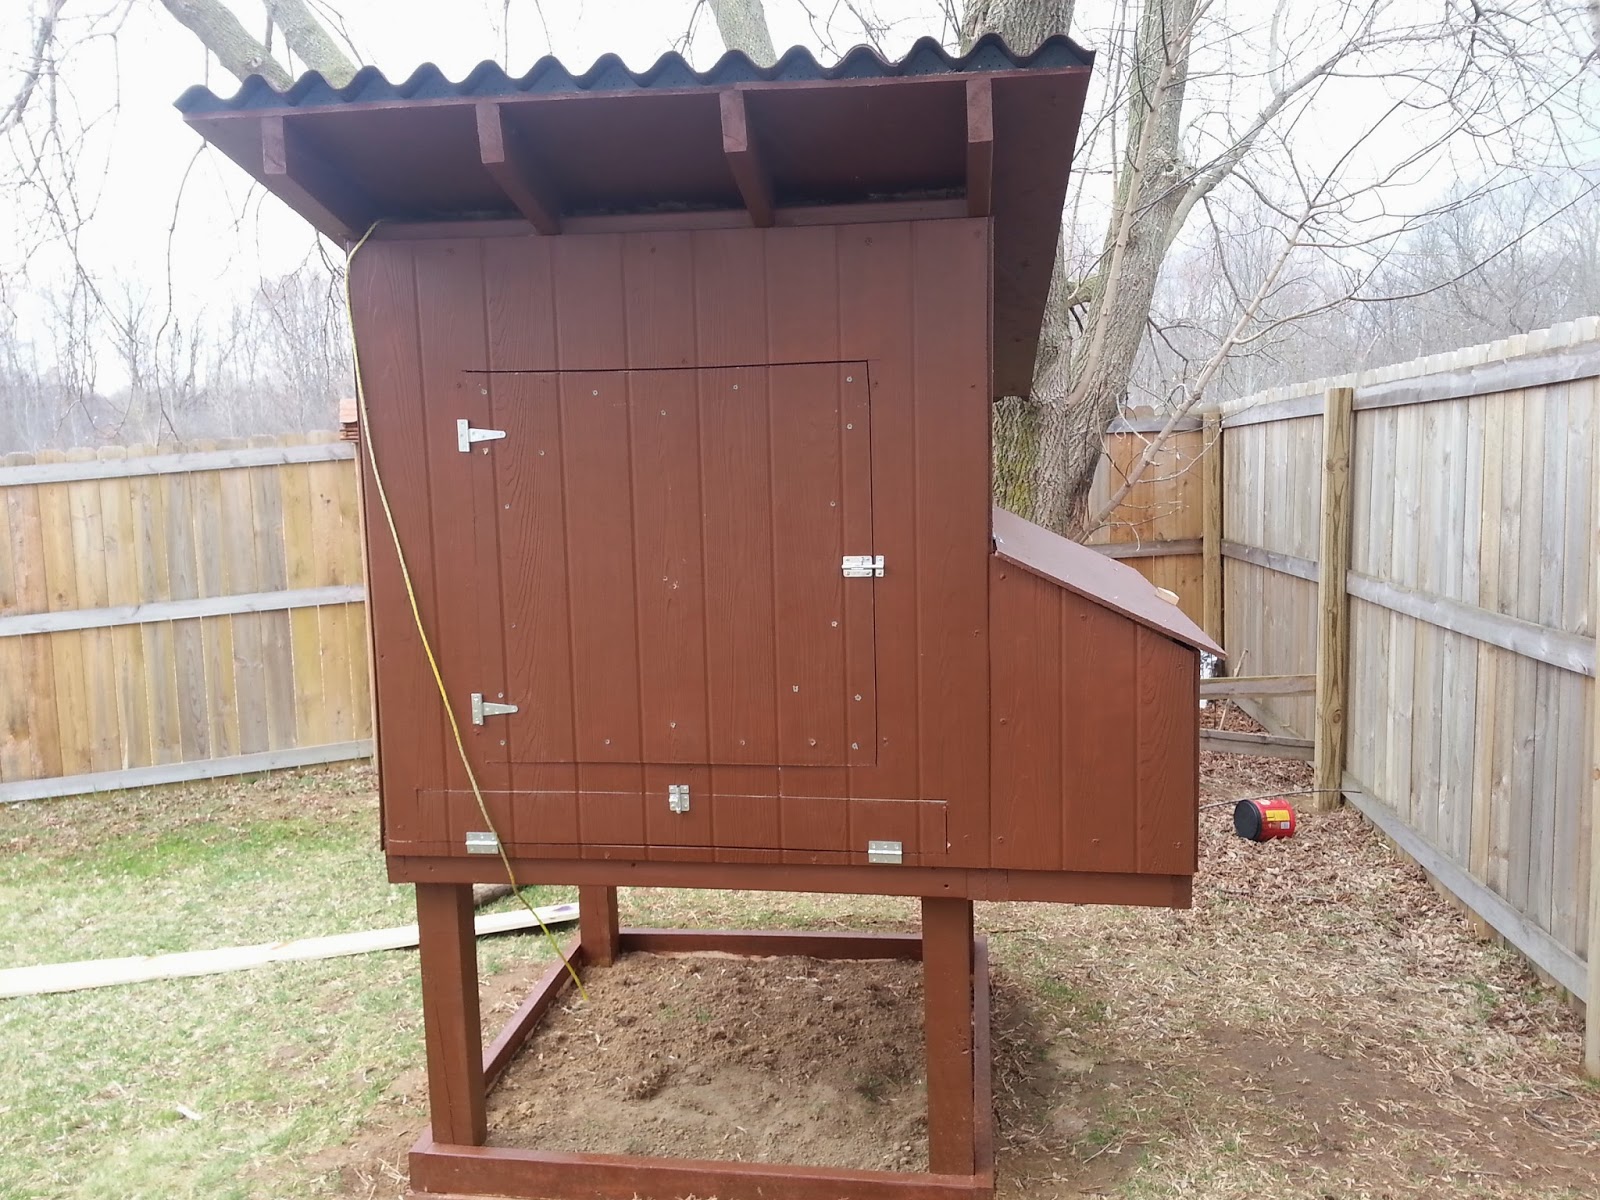 How to Build the Easy to Clean Backyard Chicken Coop ...